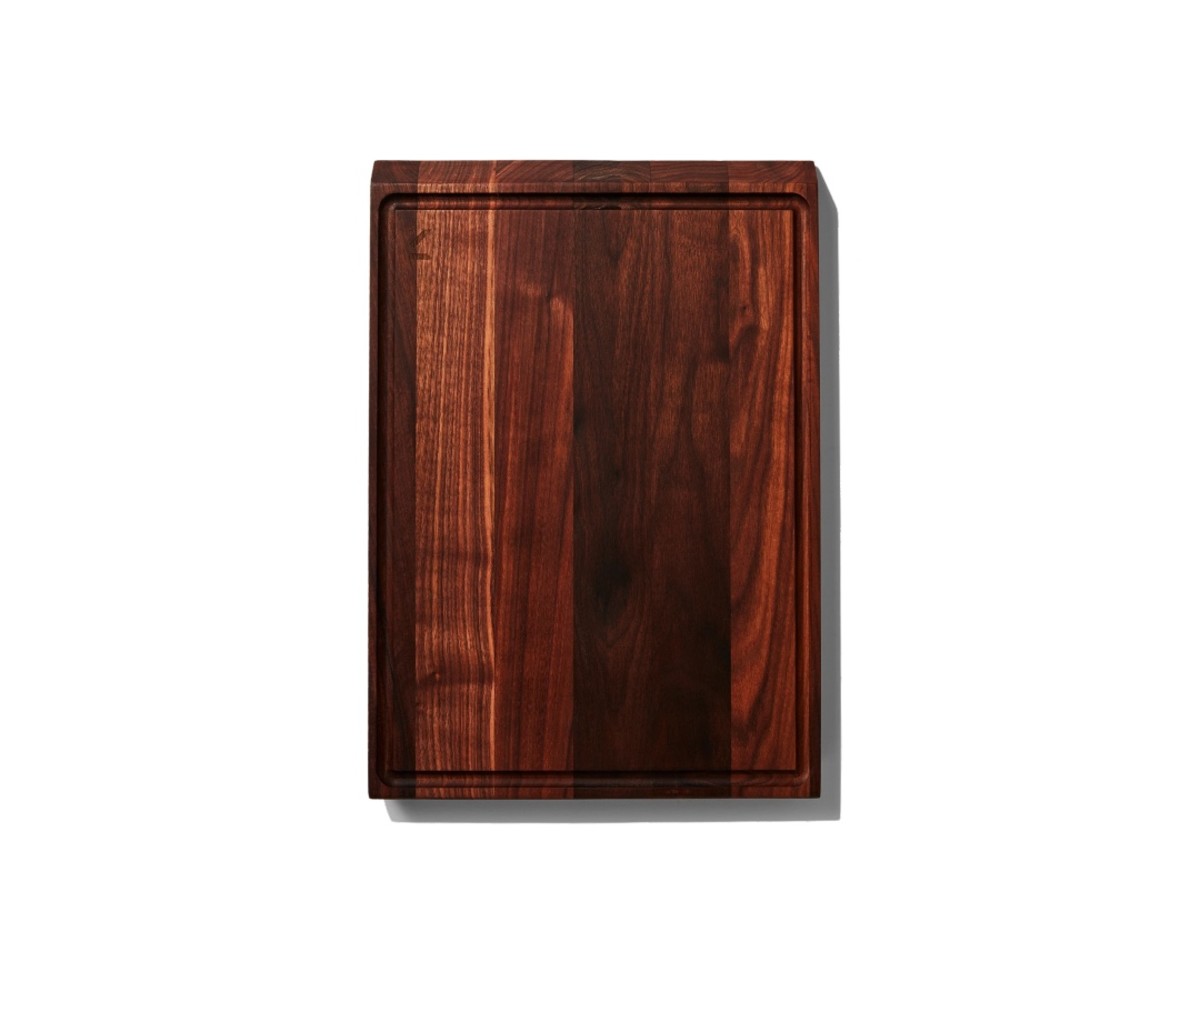 The Material Angled Cutting Board is nice enough to double as a serving tray.